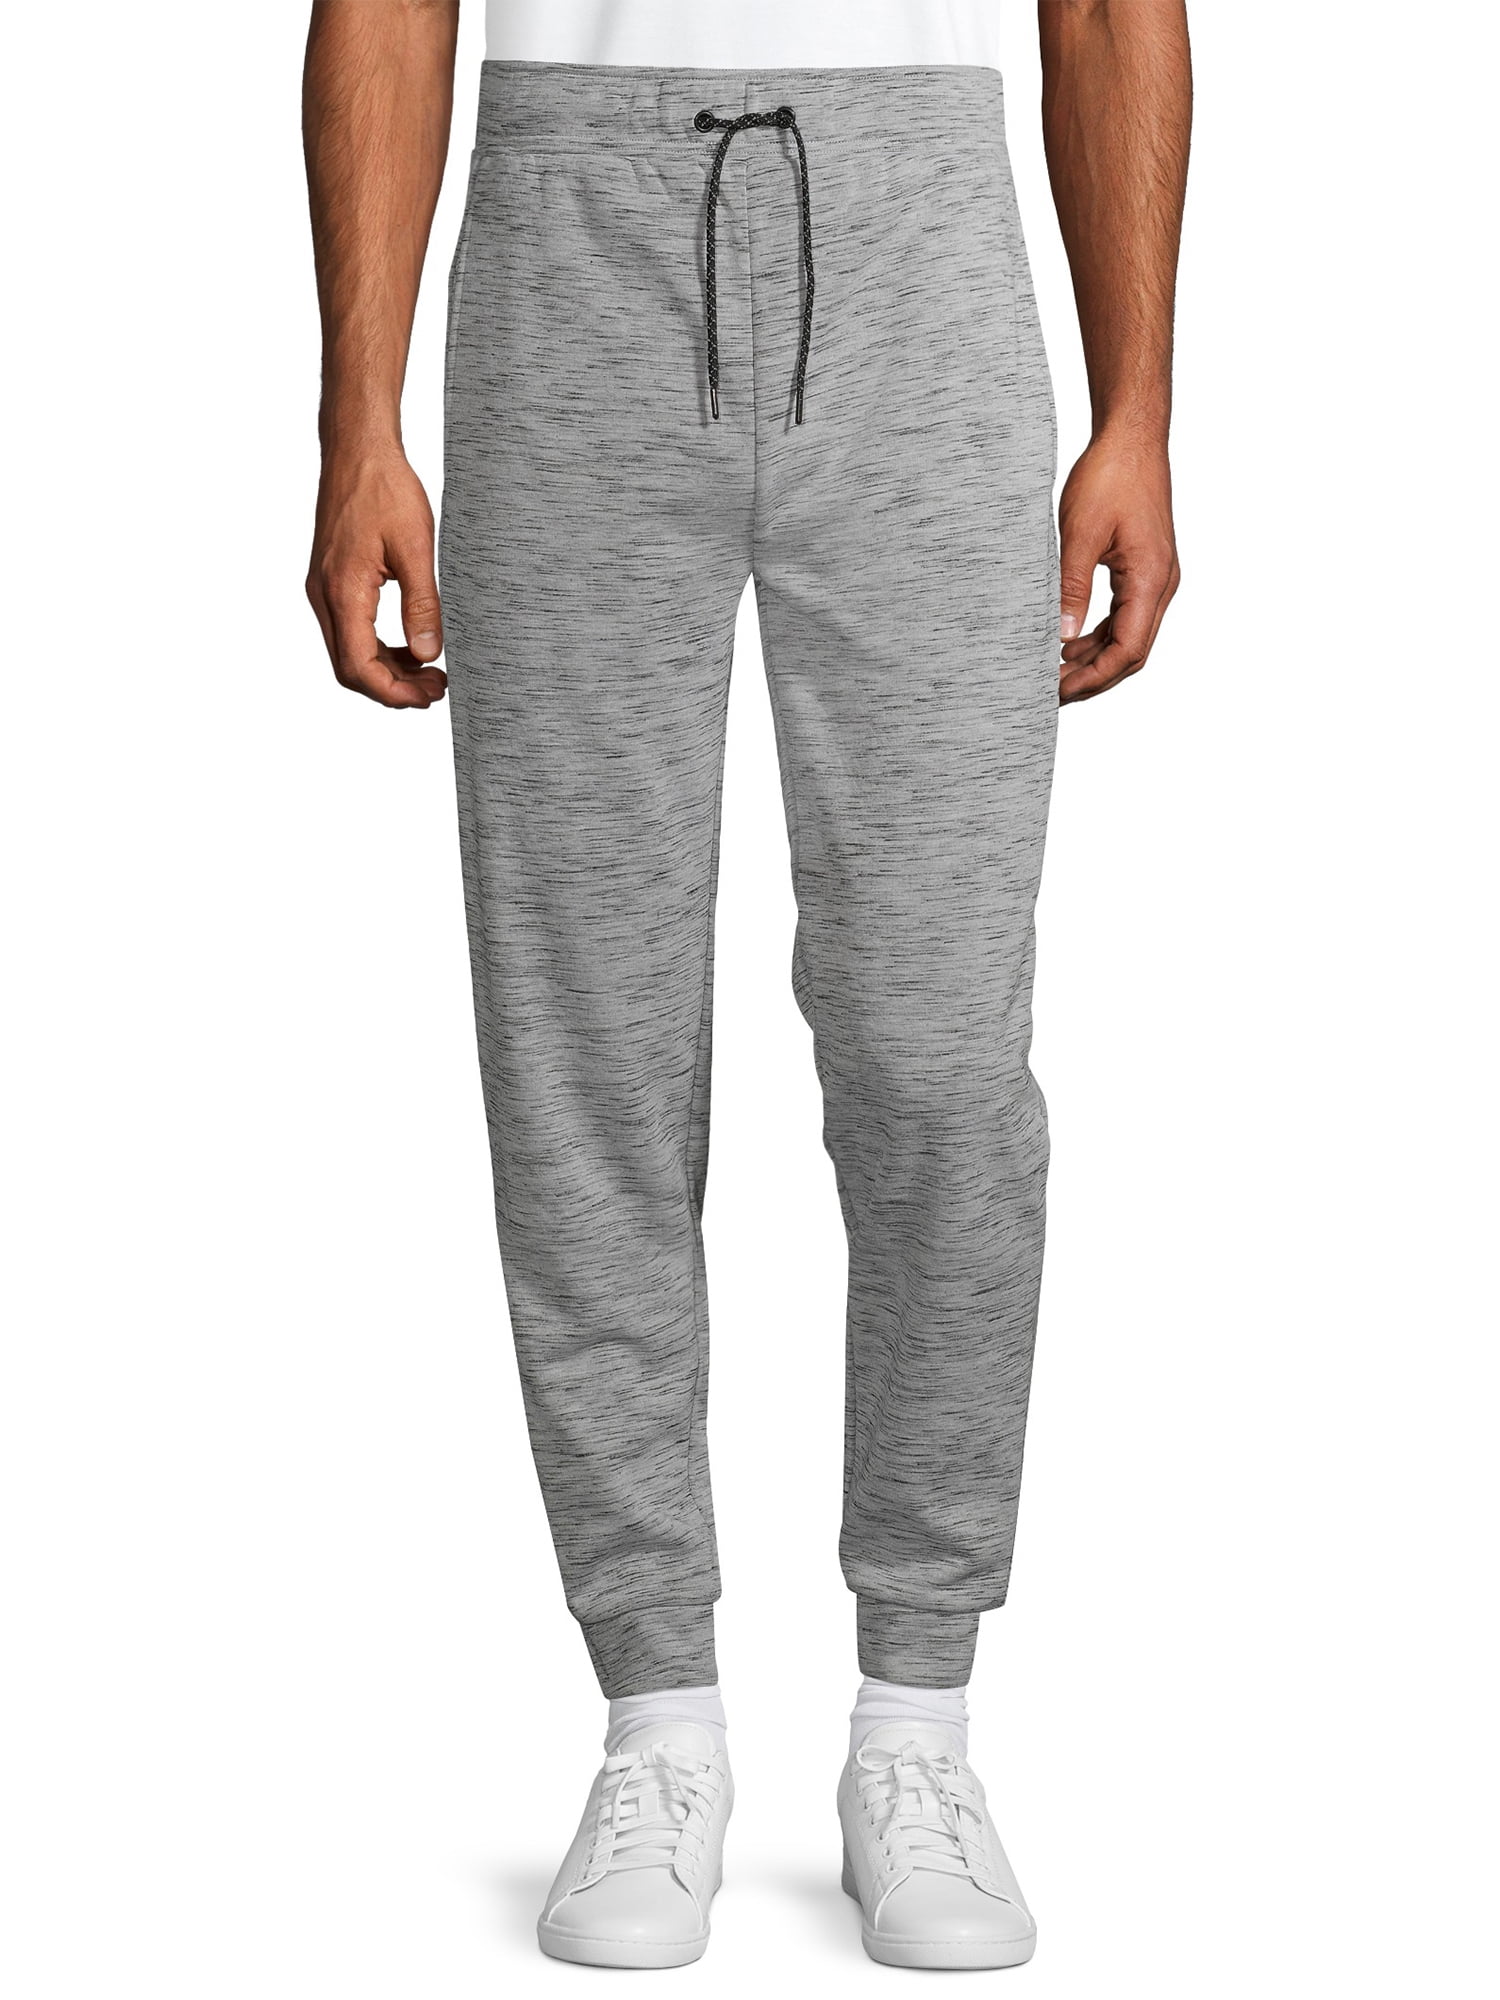 Hollywood - Hollywood Jeans Men's Honeycomb Lined Fleece Jogger Pants ...